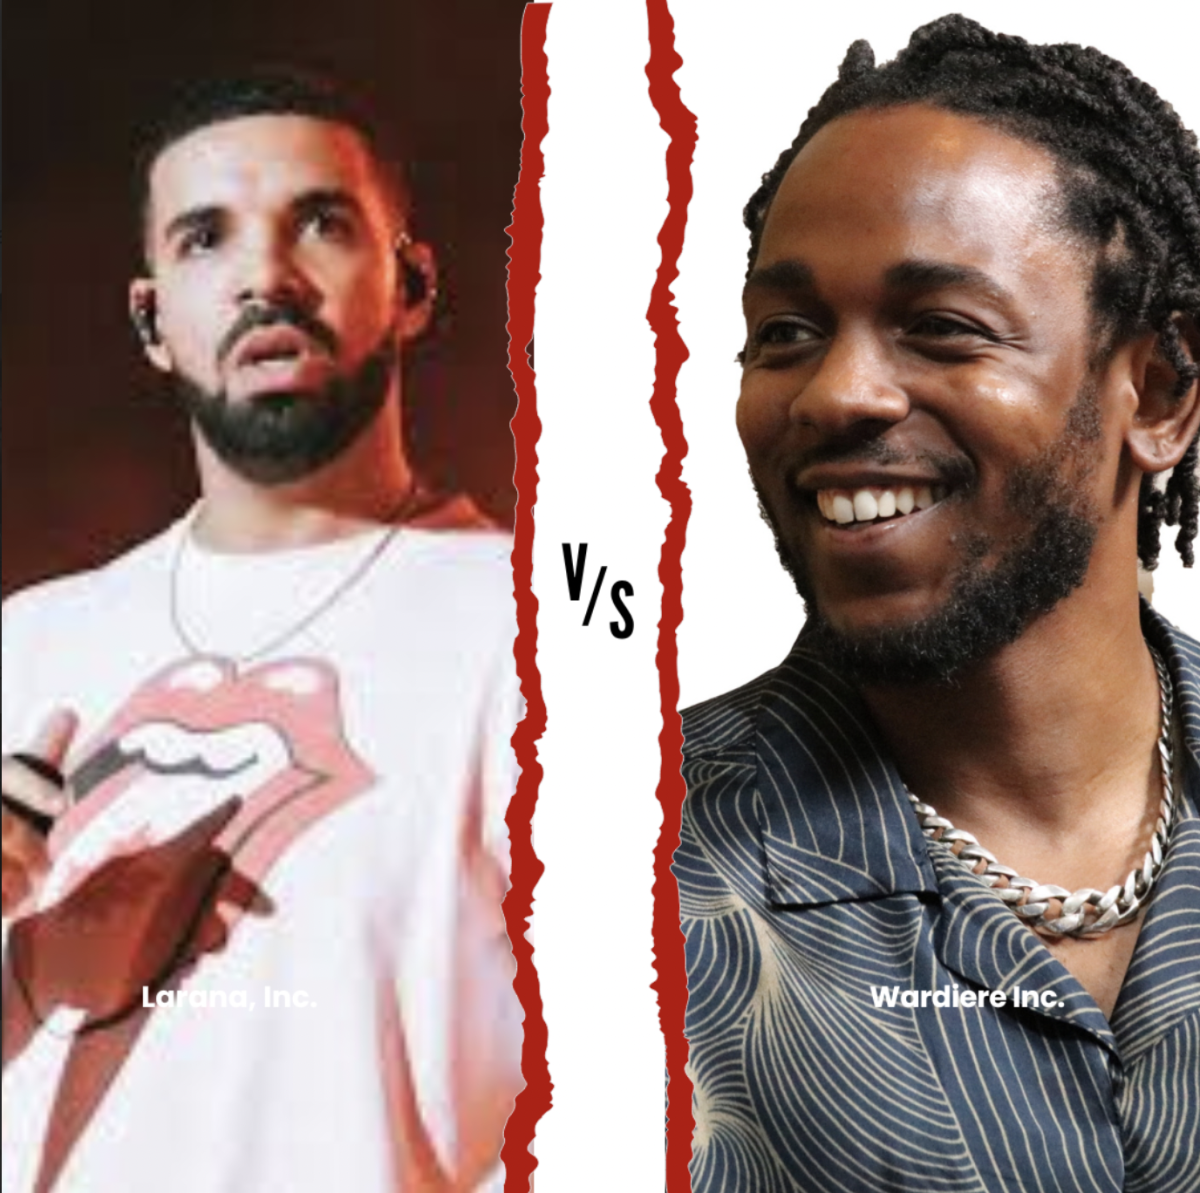 Drake+and+Kendrick+Lamar+shred+out+their+beef+through+heated+rap+diss+songs.